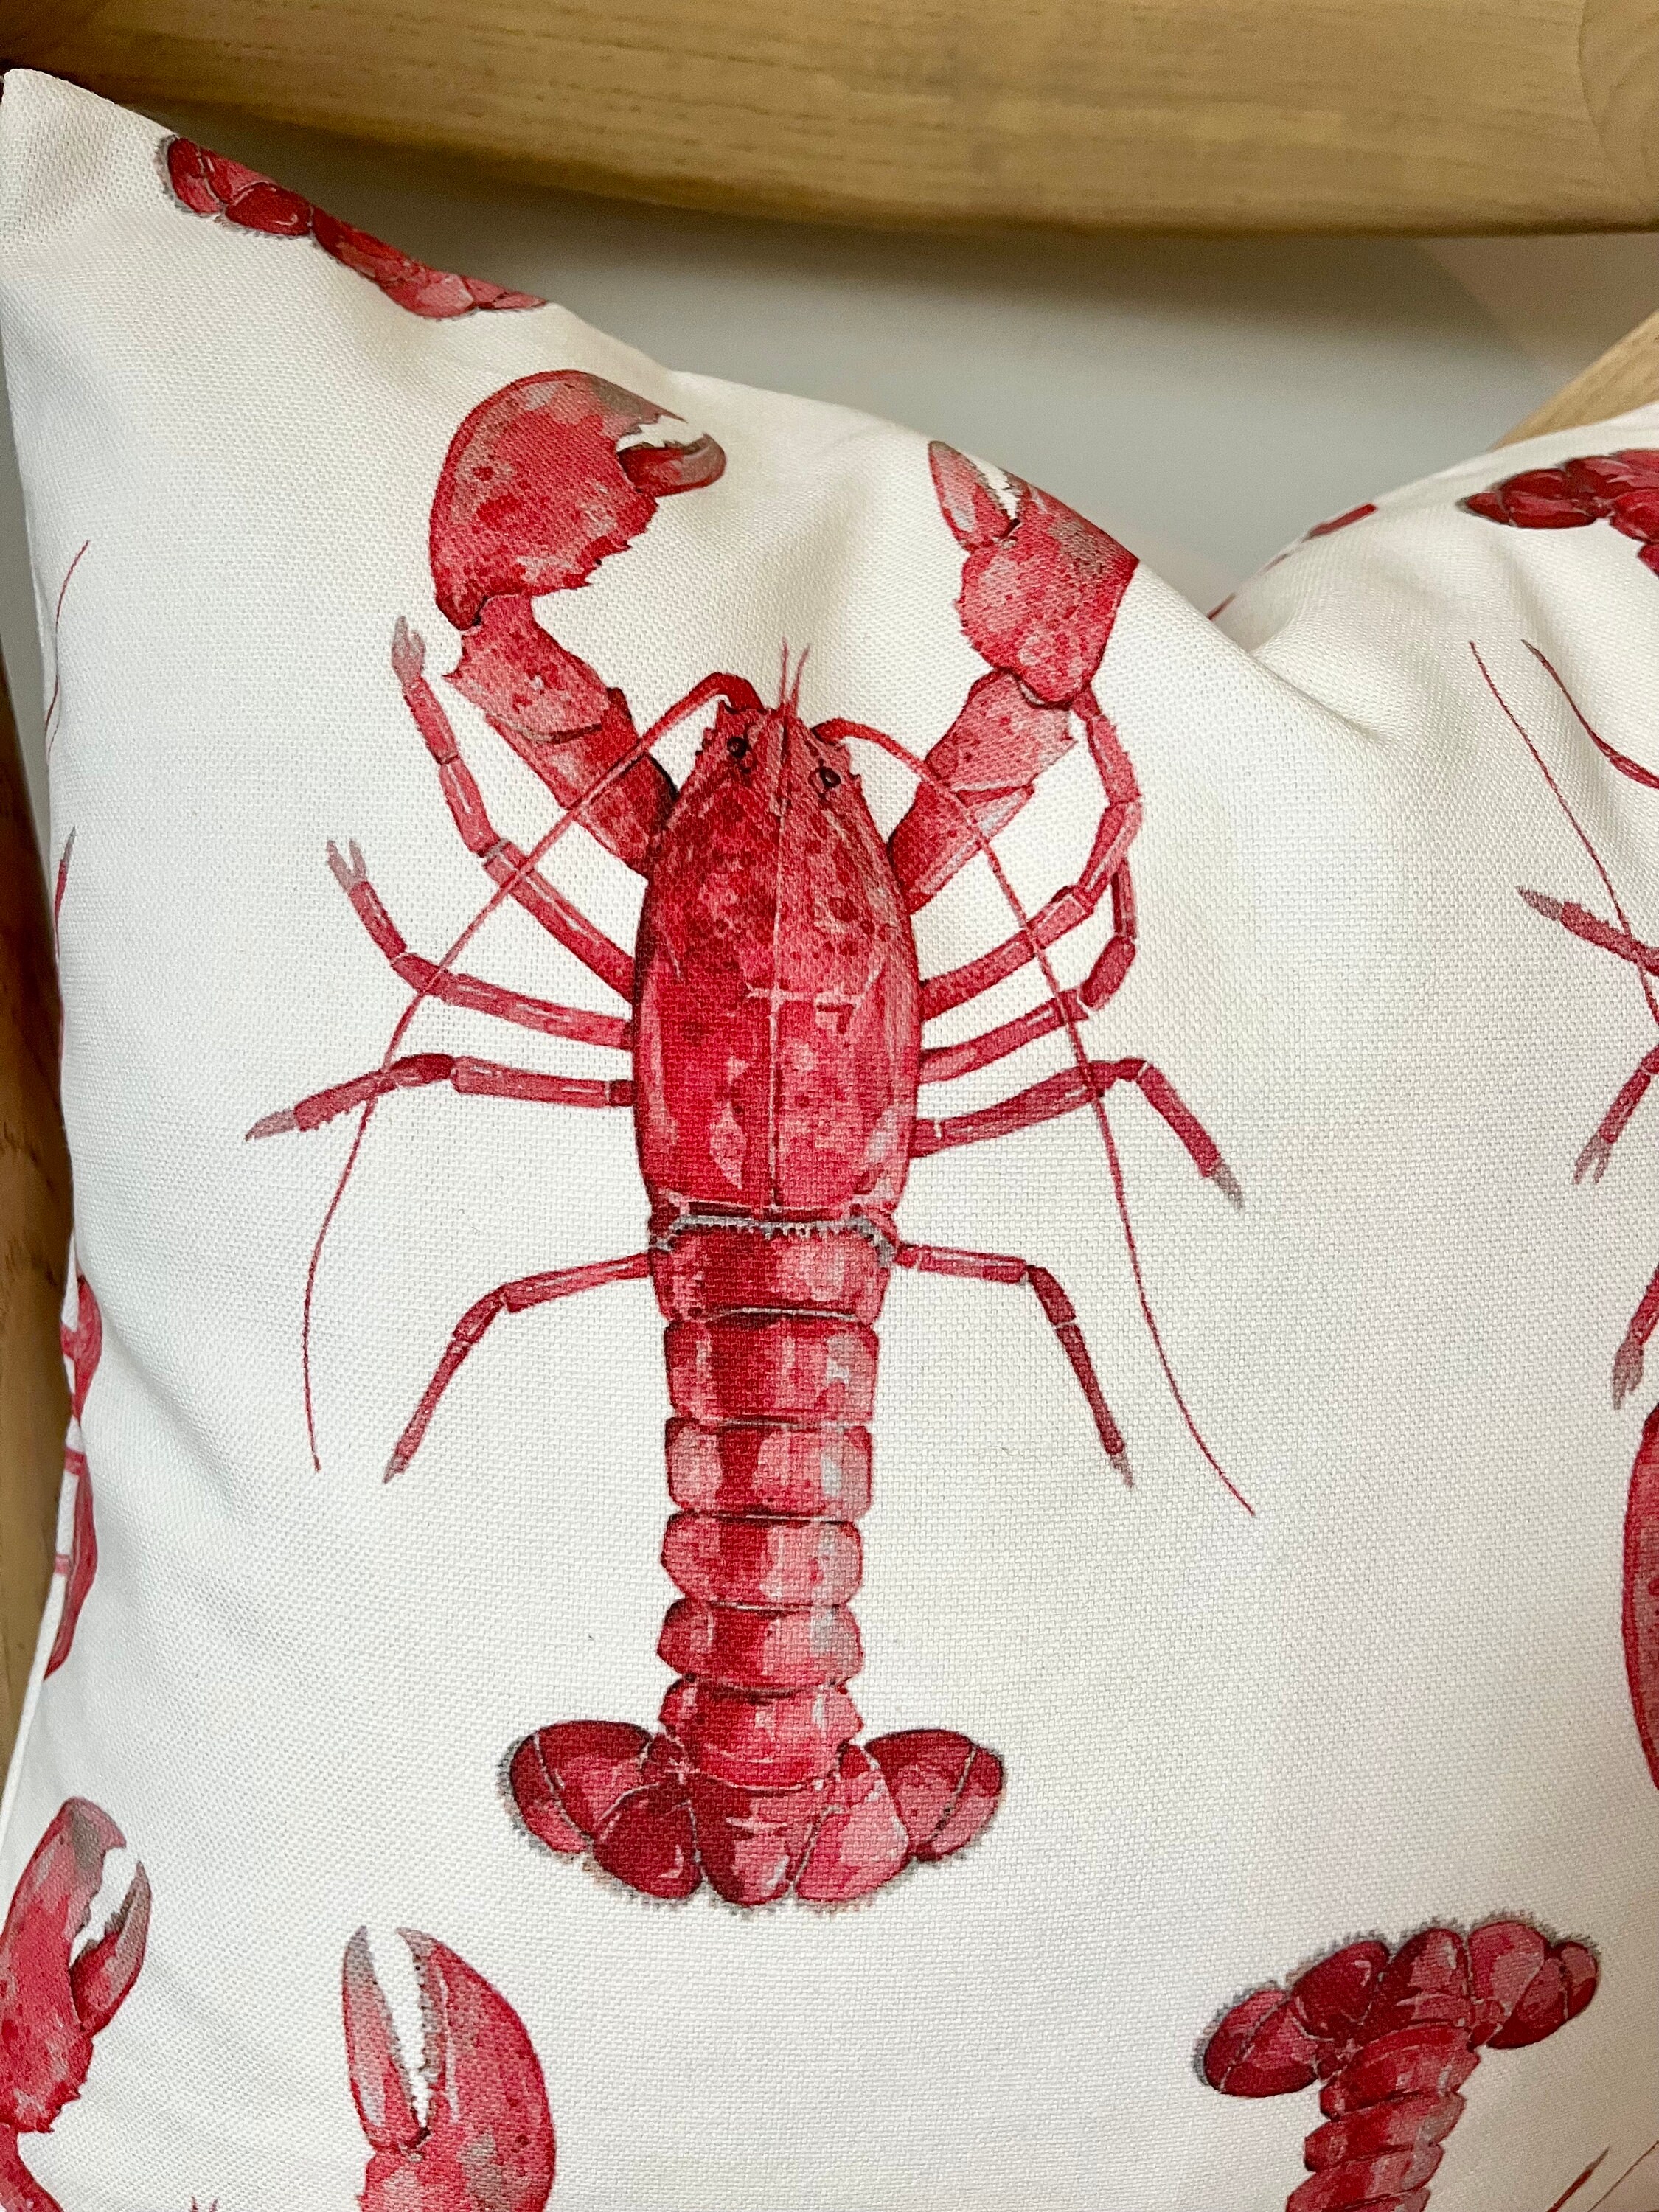 Lobster Red and White Pillow Cover, Throw Pillow Cushion, 14 x 14